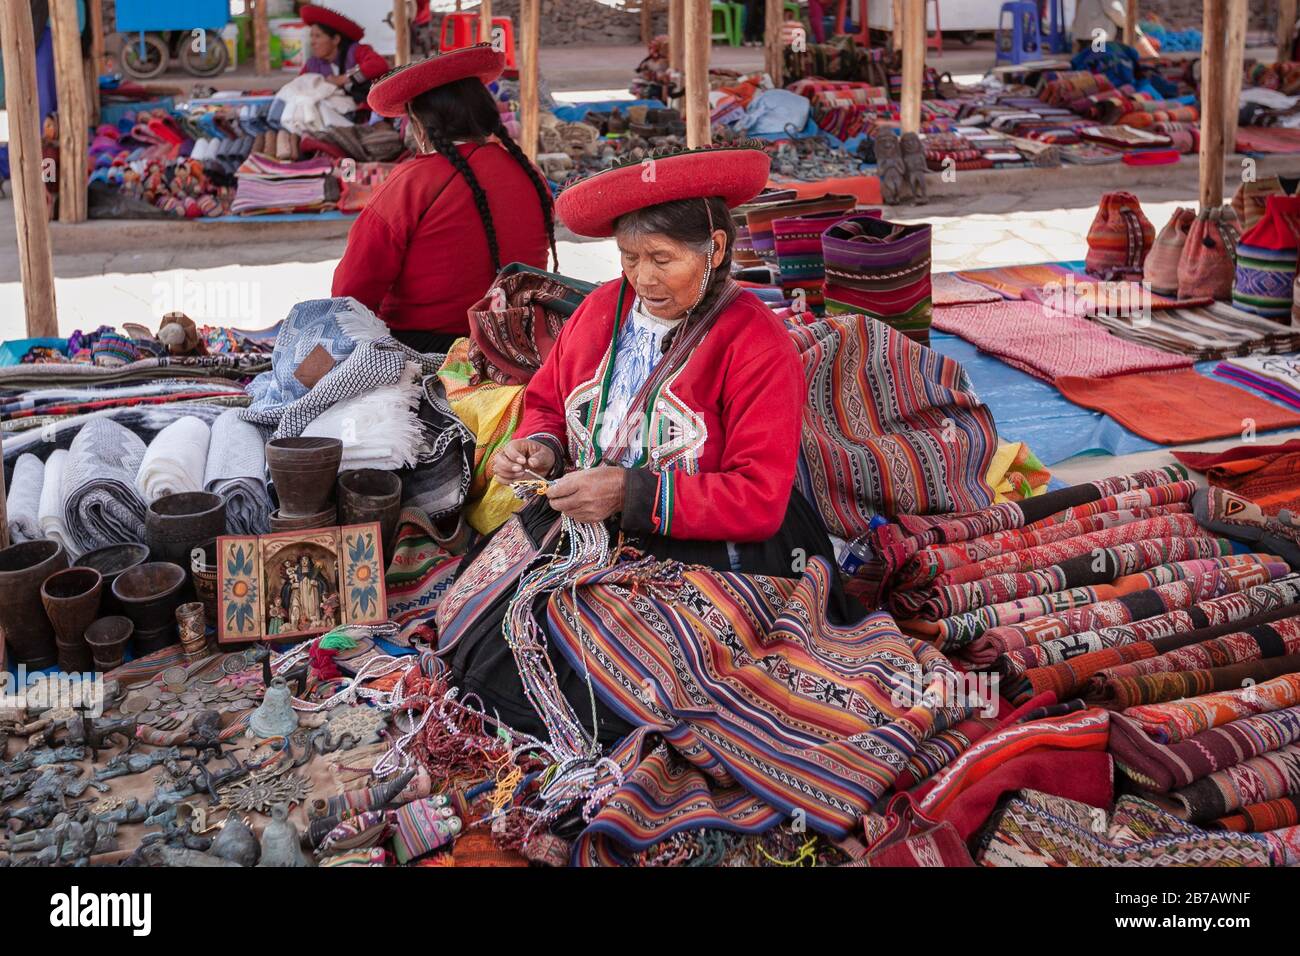 Cuzco, Peru: Quechua women in traditional indigenous clothing at market selling colorful textile making local craft souvenirs Stock Photo